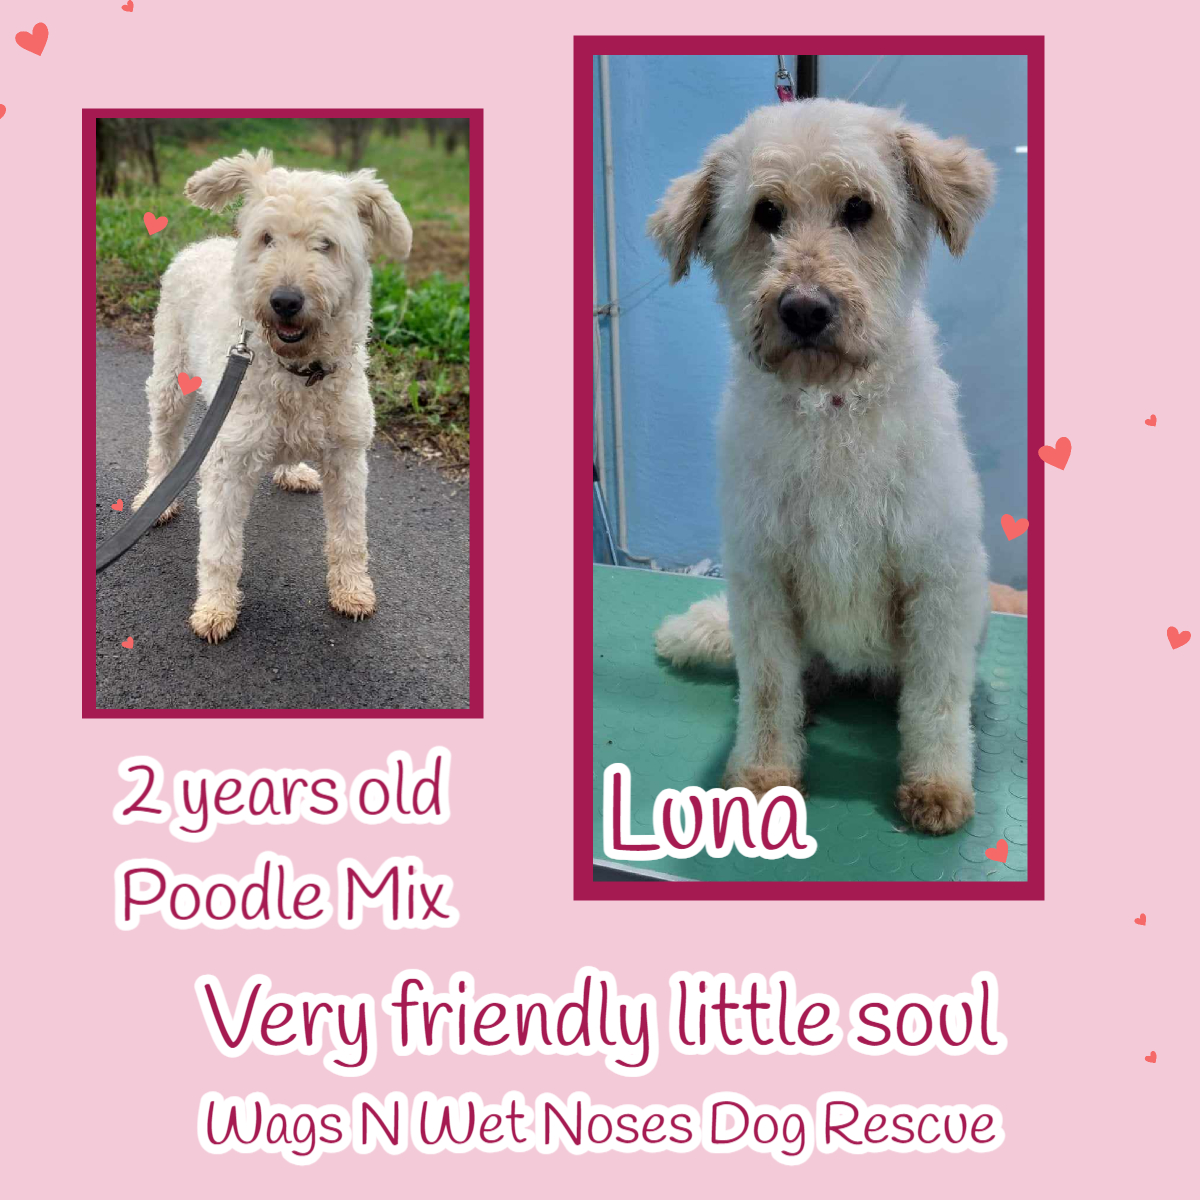 #forgottensoulshour It's time this girl had a home. LUNA is a wonderful girl who will make a great family dog or loving companion. This beautiful Poodle mix girl adores cuddles & really loves everyone she meets. She is just so lovely, & with her having a poodle in her mix doesn’t